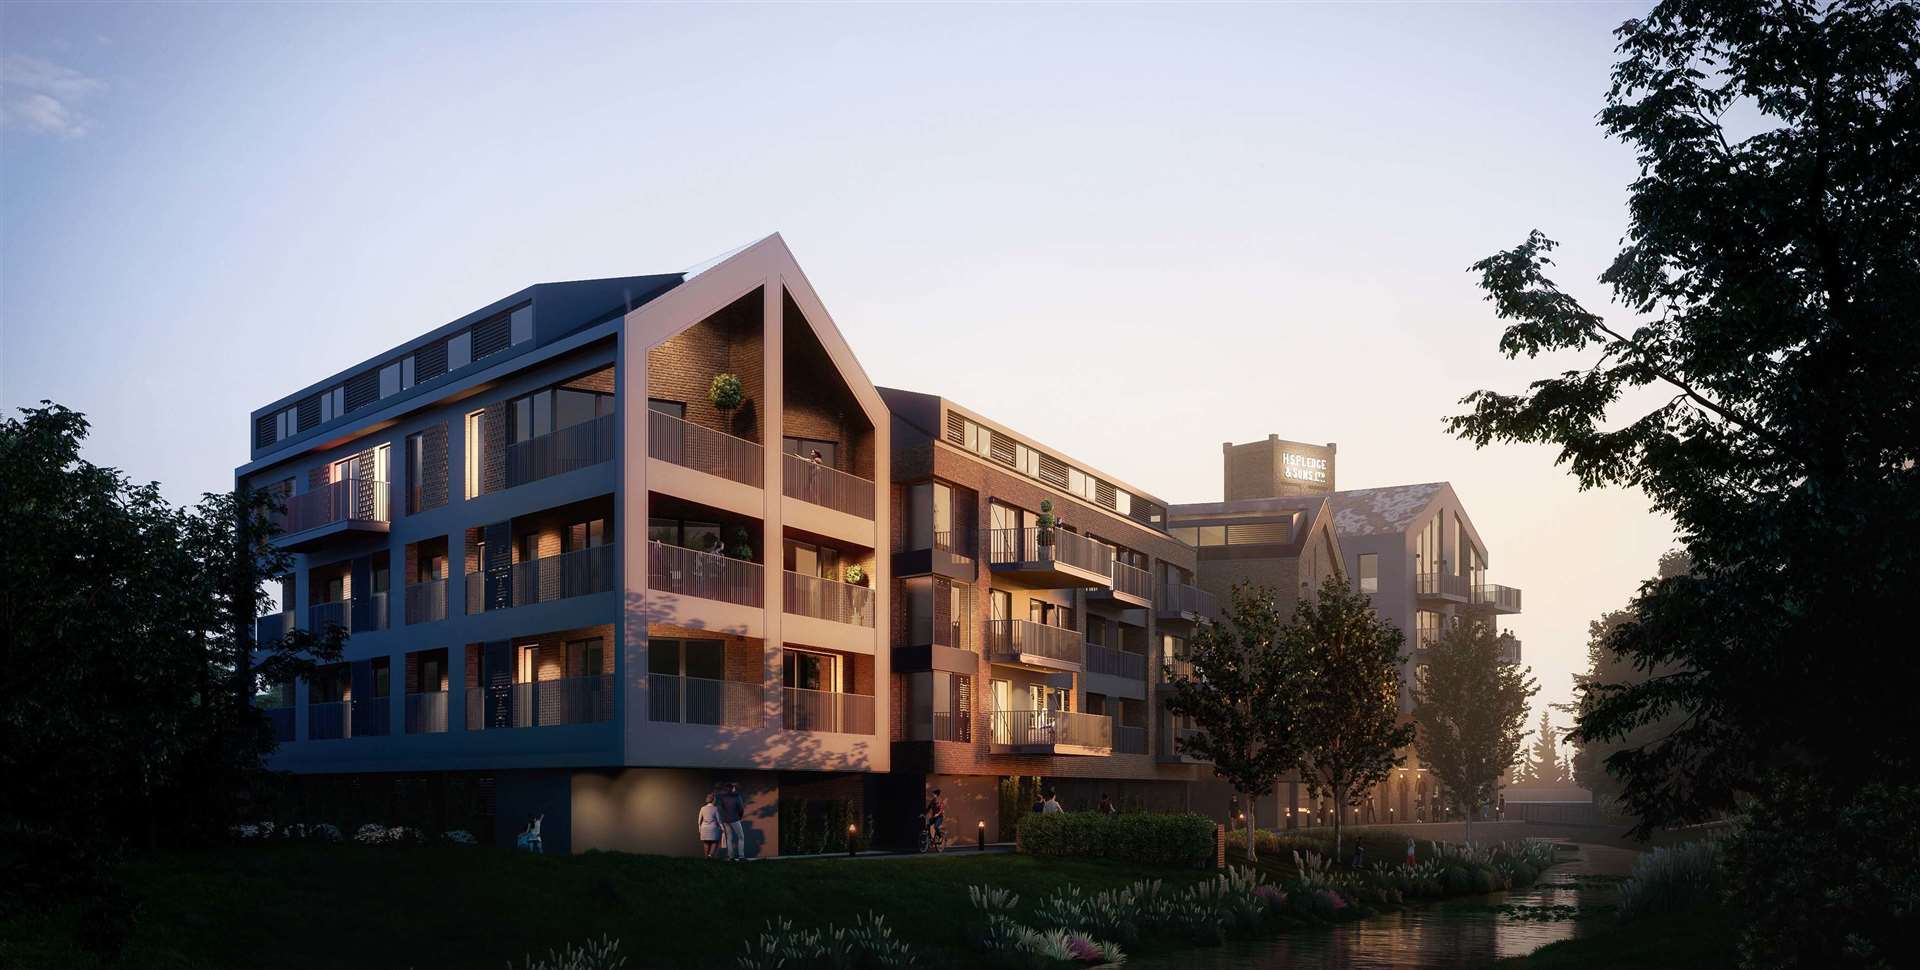 Fifty-three flats are planned as part of the project. Picture: Hollaway Studio